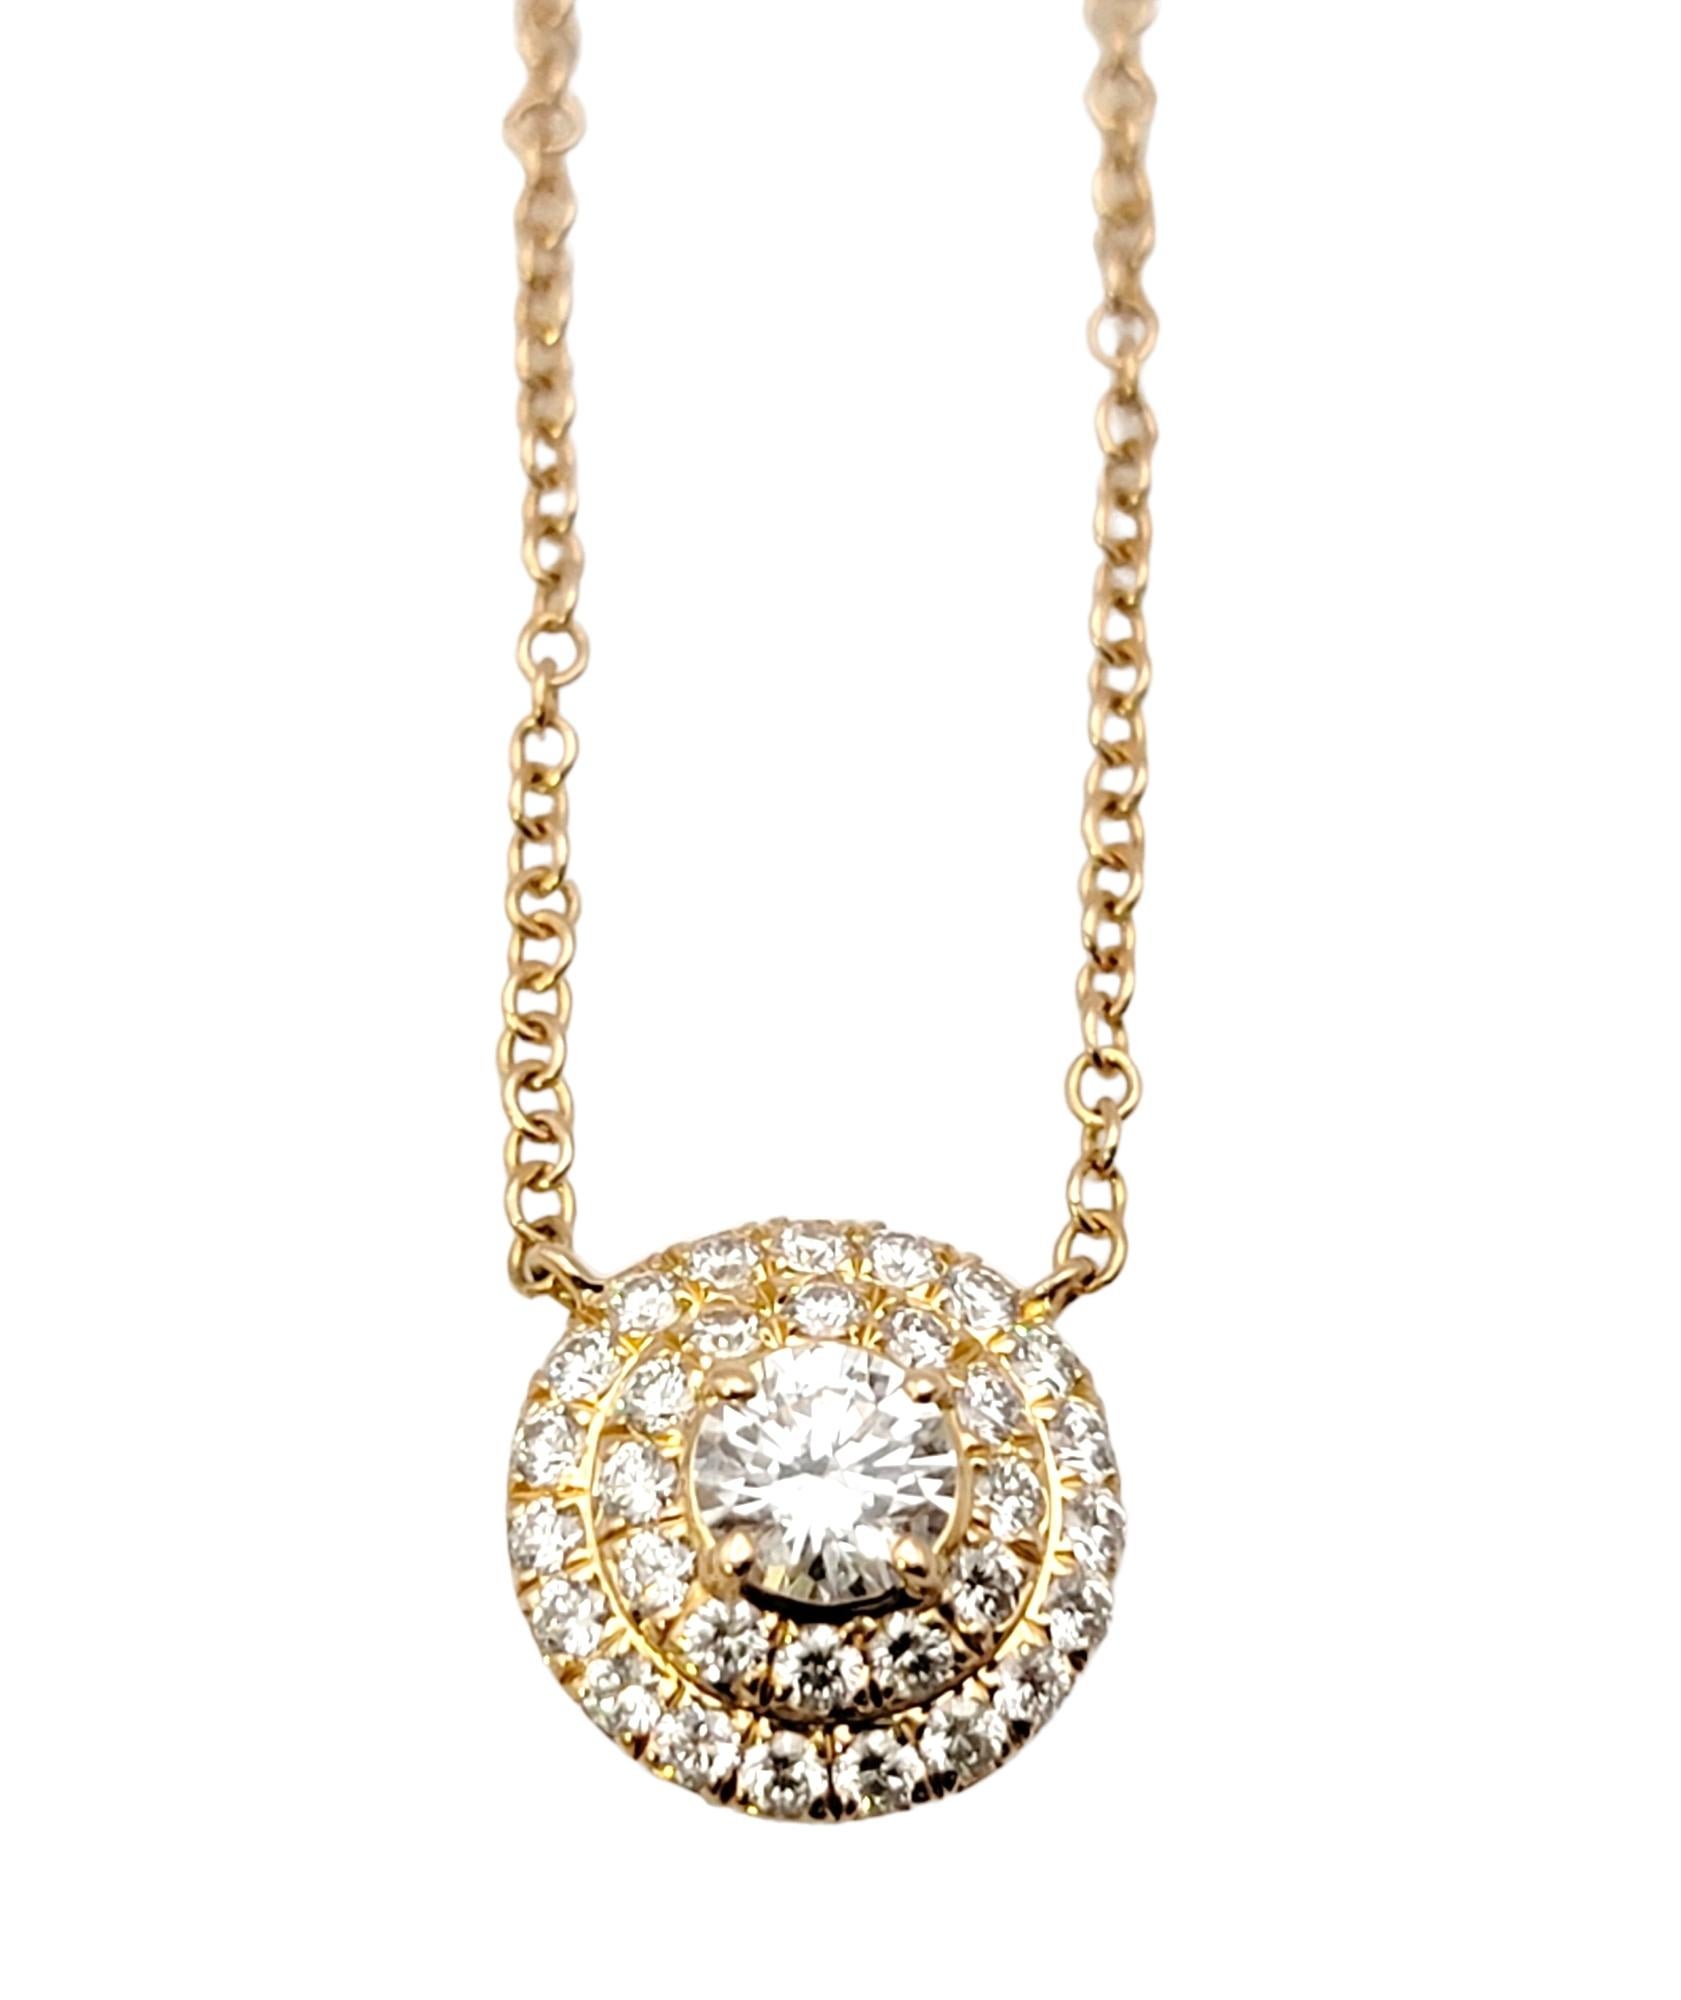 This sparkling Tiffany & Co. Soleste diamond halo pendant necklace is stunningly simple, yet undeniably beautiful. The delicate rose gold chain and icy circle of natural round diamonds goes with just about everything. It features a single round